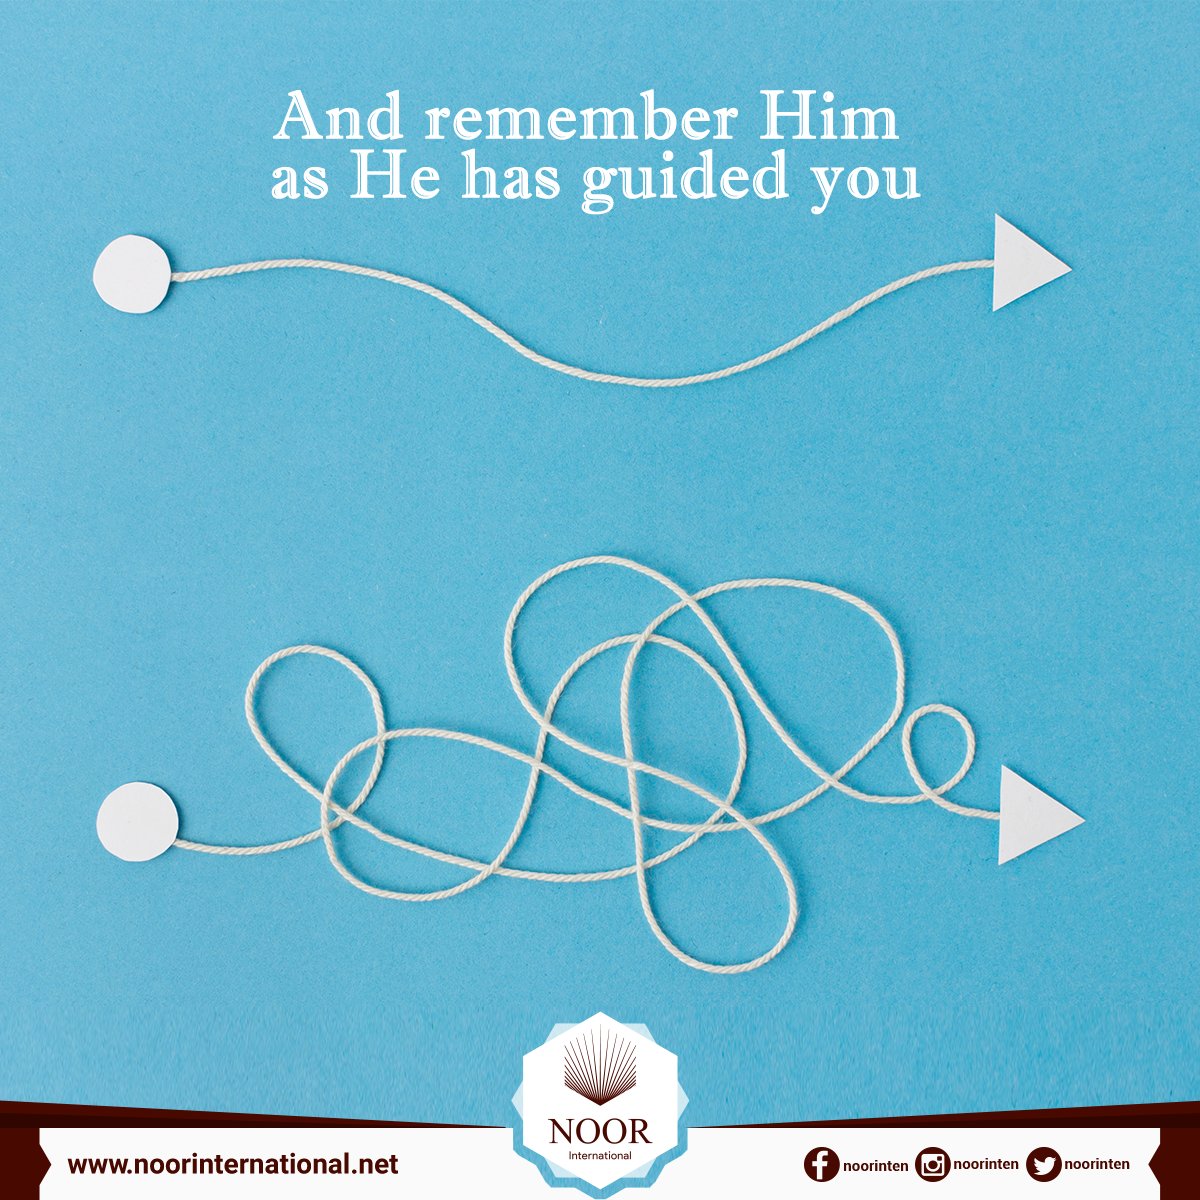 And remember Him, as He has guided you